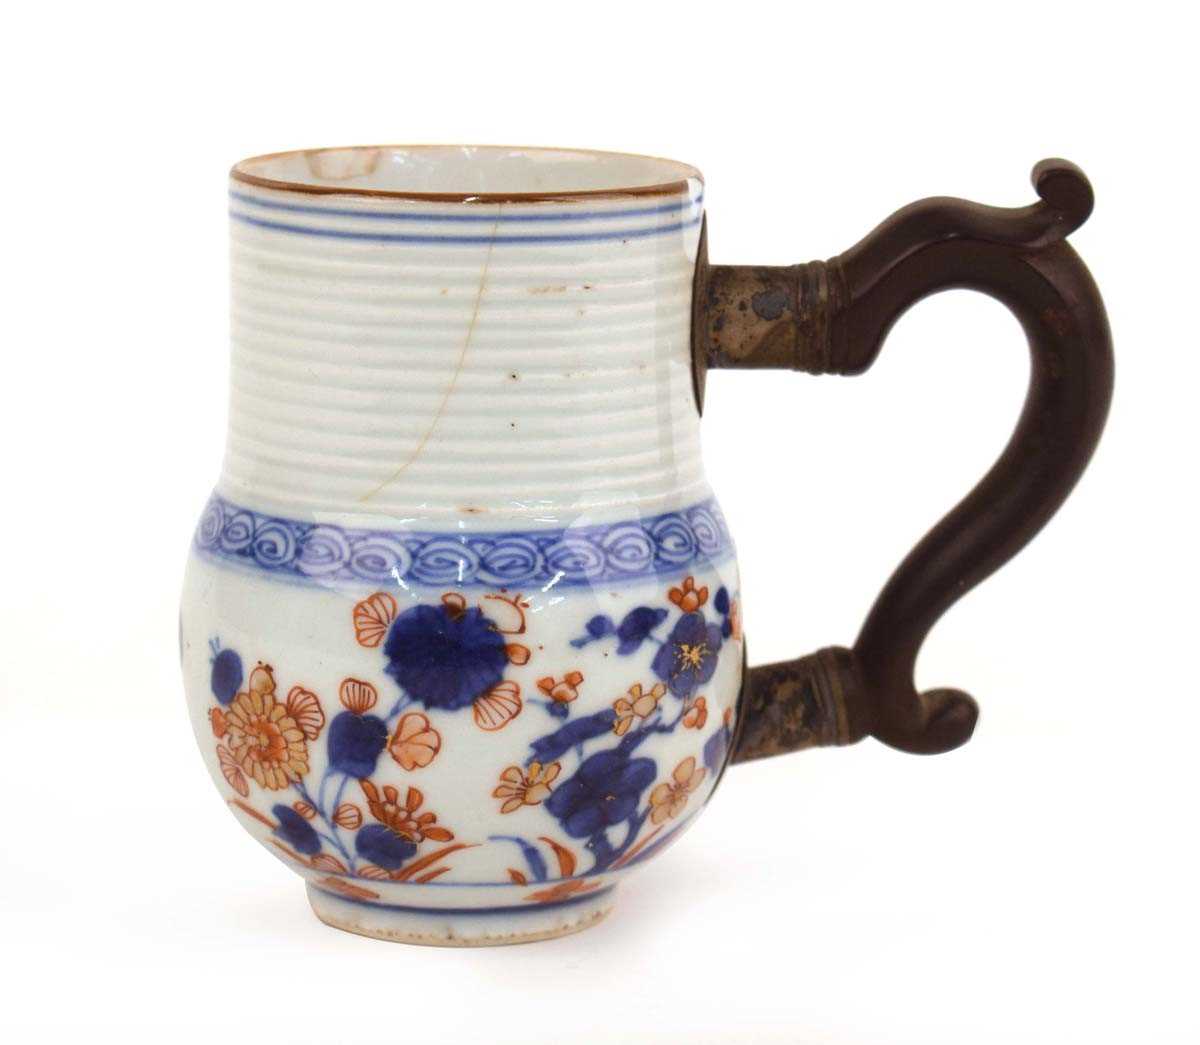 A Chinese mug of typical form with horizontal ribbing decorated in the Imari palette, later